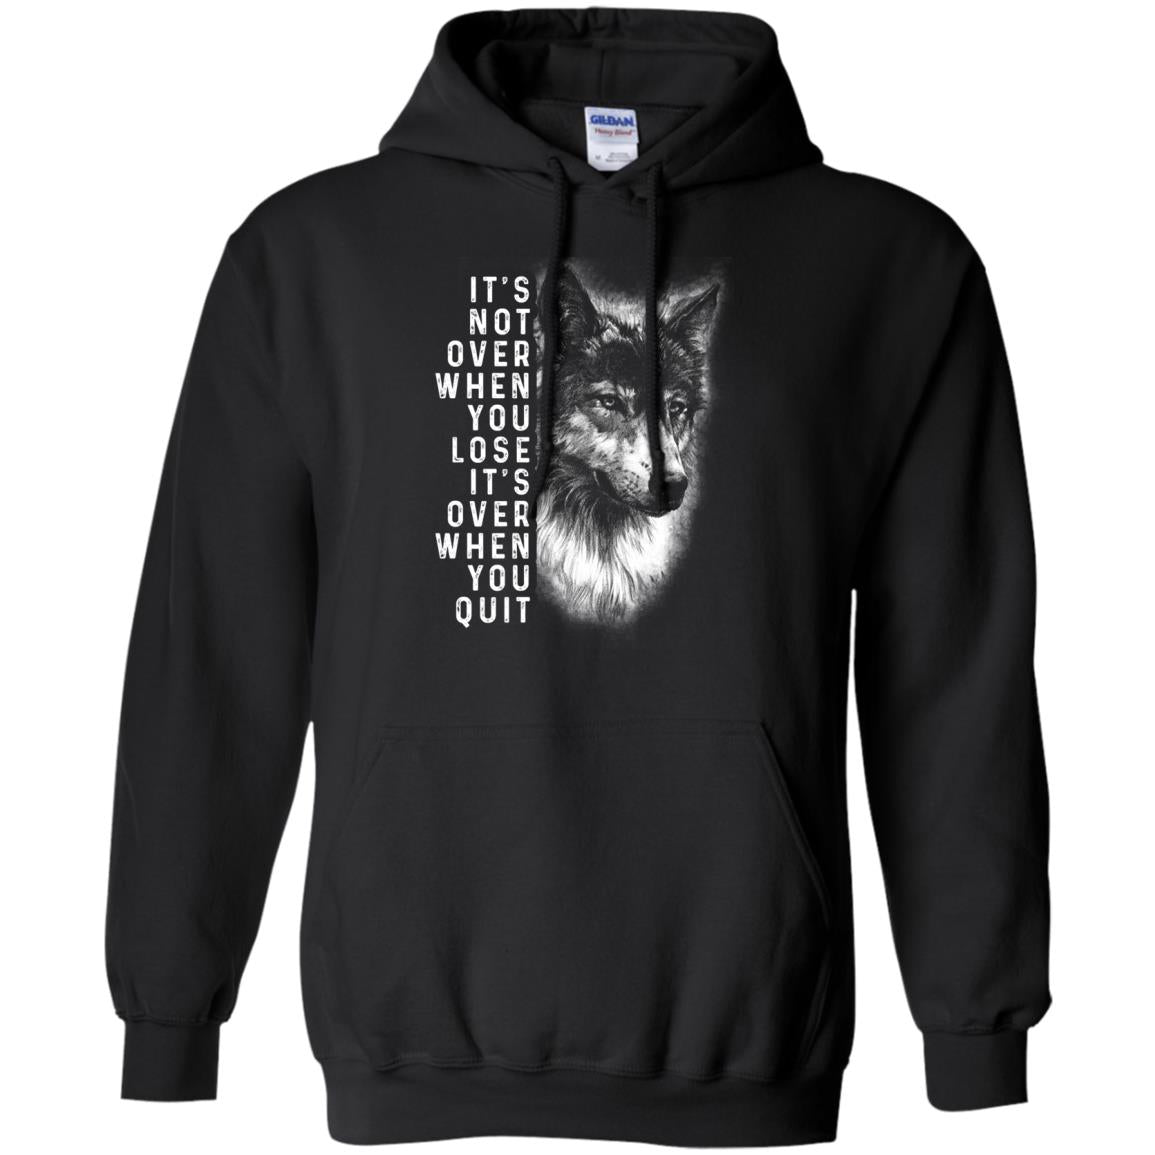 It_s Not Over When You Lose It_s Over When You Quit ShirtG185 Gildan Pullover Hoodie 8 oz.